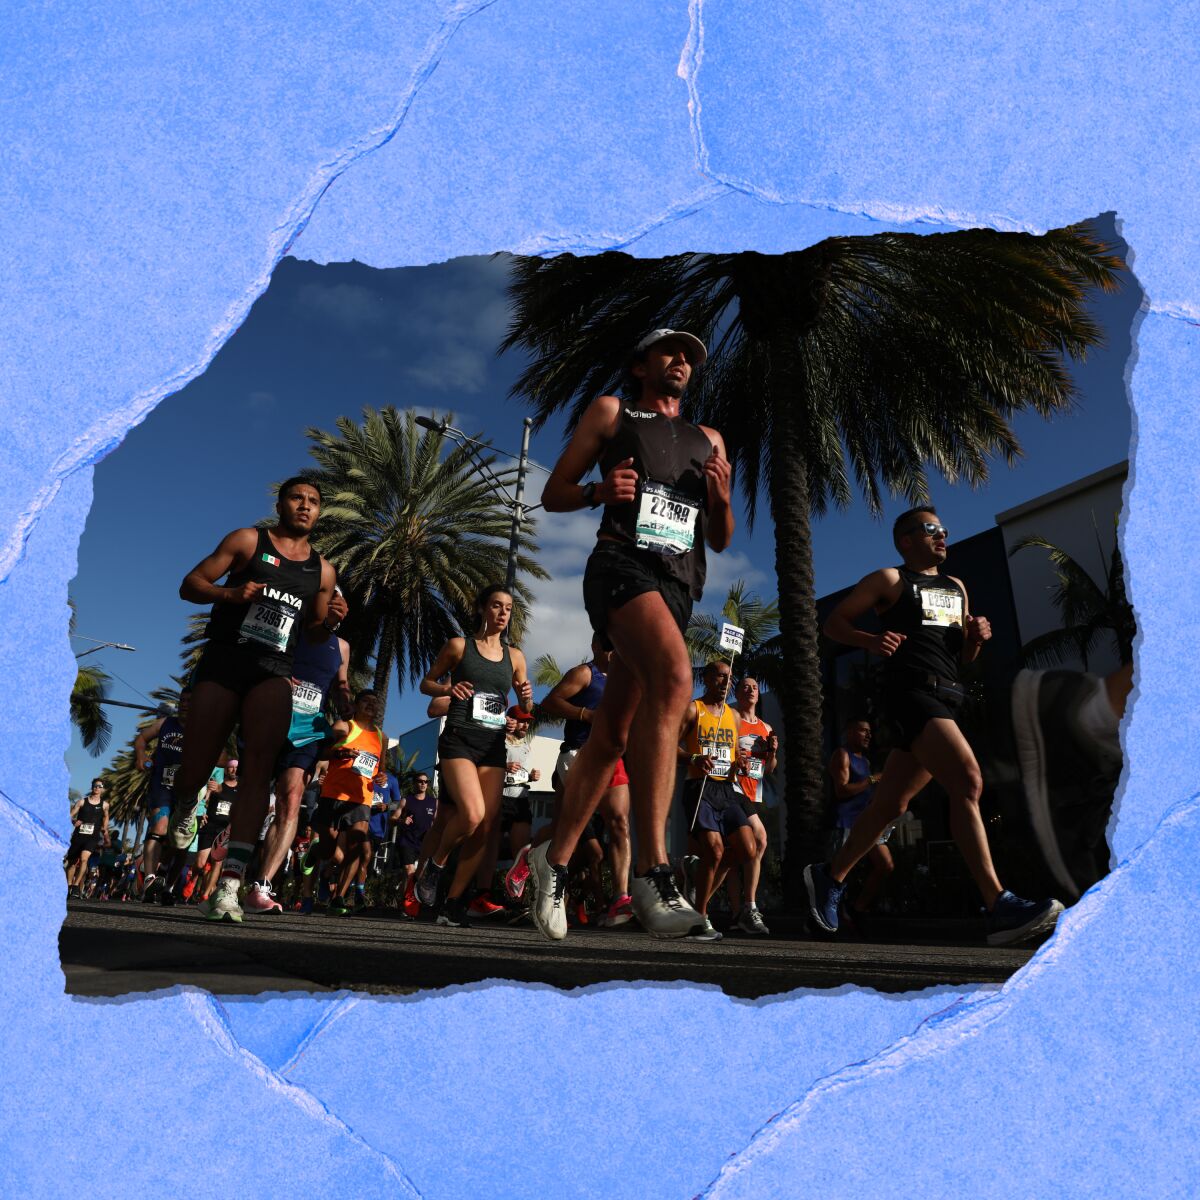 Competitors in running gear and wearing numbers run beneath palm trees and blue sky.